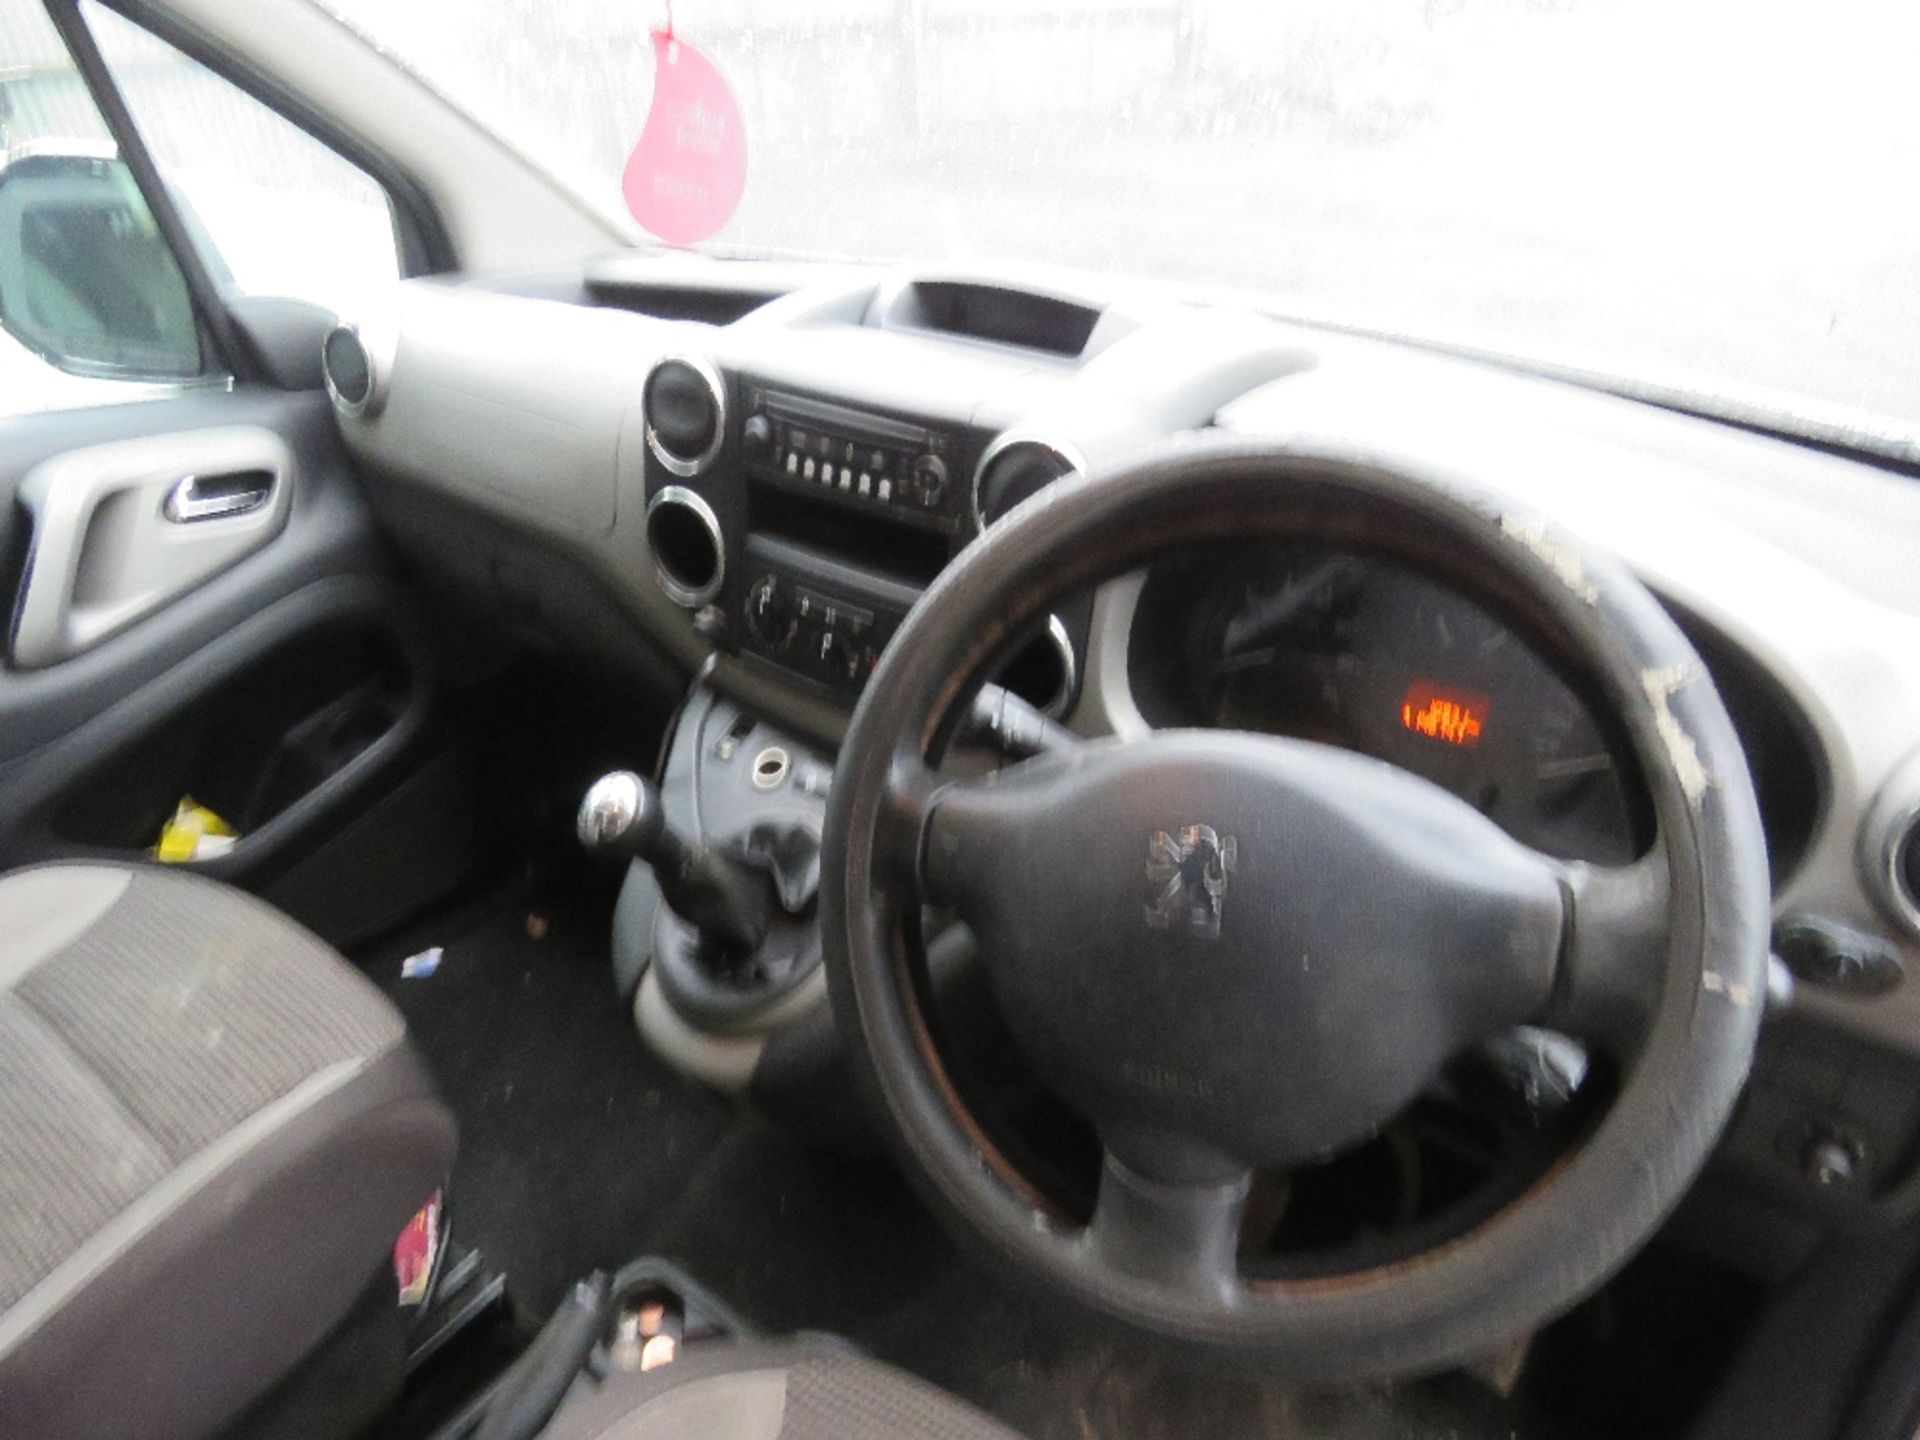 PEUGEOT PARTNER CAR REG:AXZ 3843. WITH V5 FIRST REGISTERED 23/10/2010. MOT EXPIRED. MANUAL GEARBOX. - Image 6 of 8